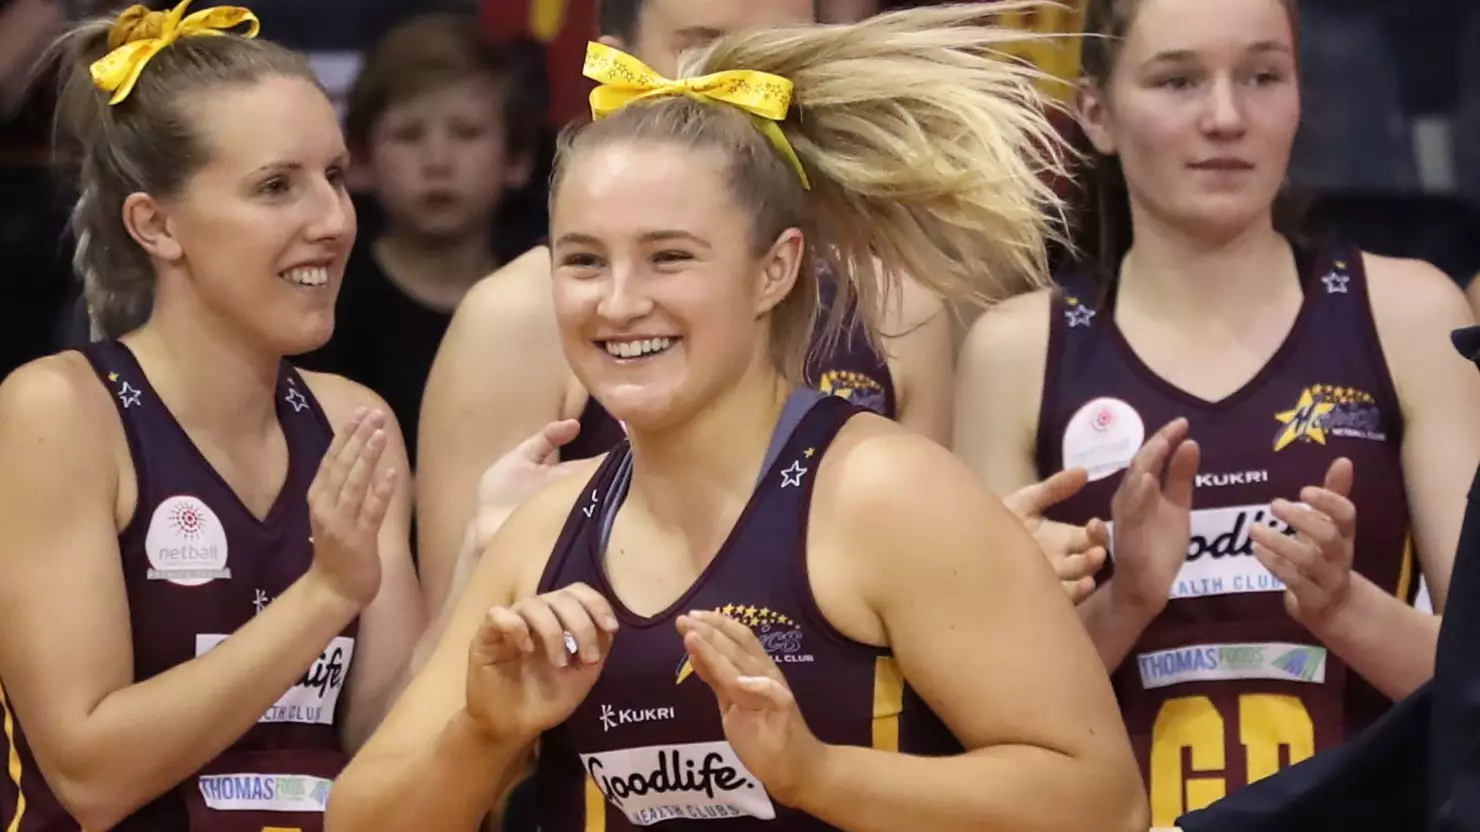 Aussie Netball Community In Mourning After Tragic Death Of 19-Year-Old Ivy-Rose Hughes